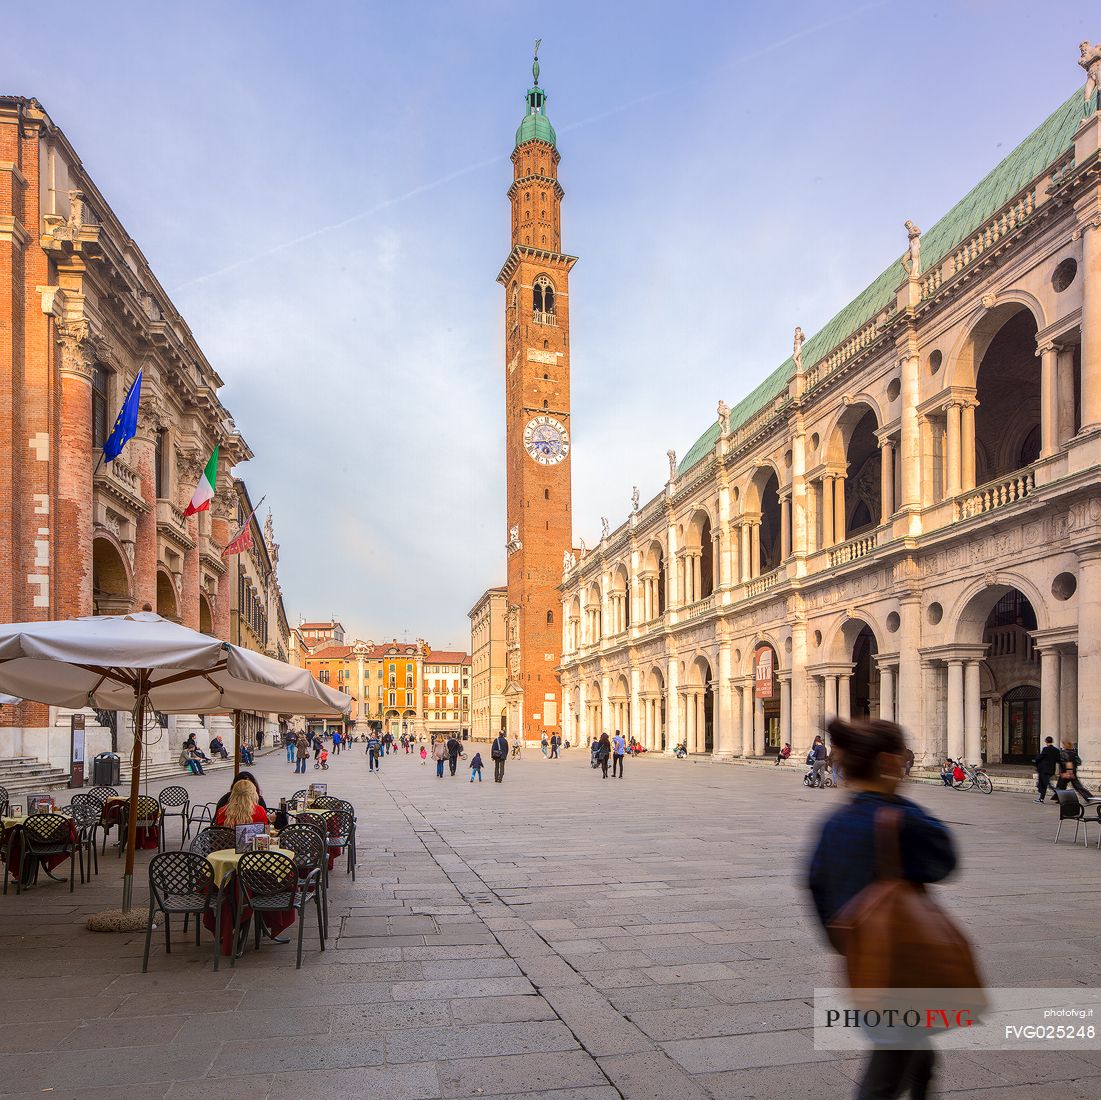 The Piazza dei Signori in the historic center of Vicenza with the facade of the Basilica Palladiana and Bissara Tower in the background, Italy